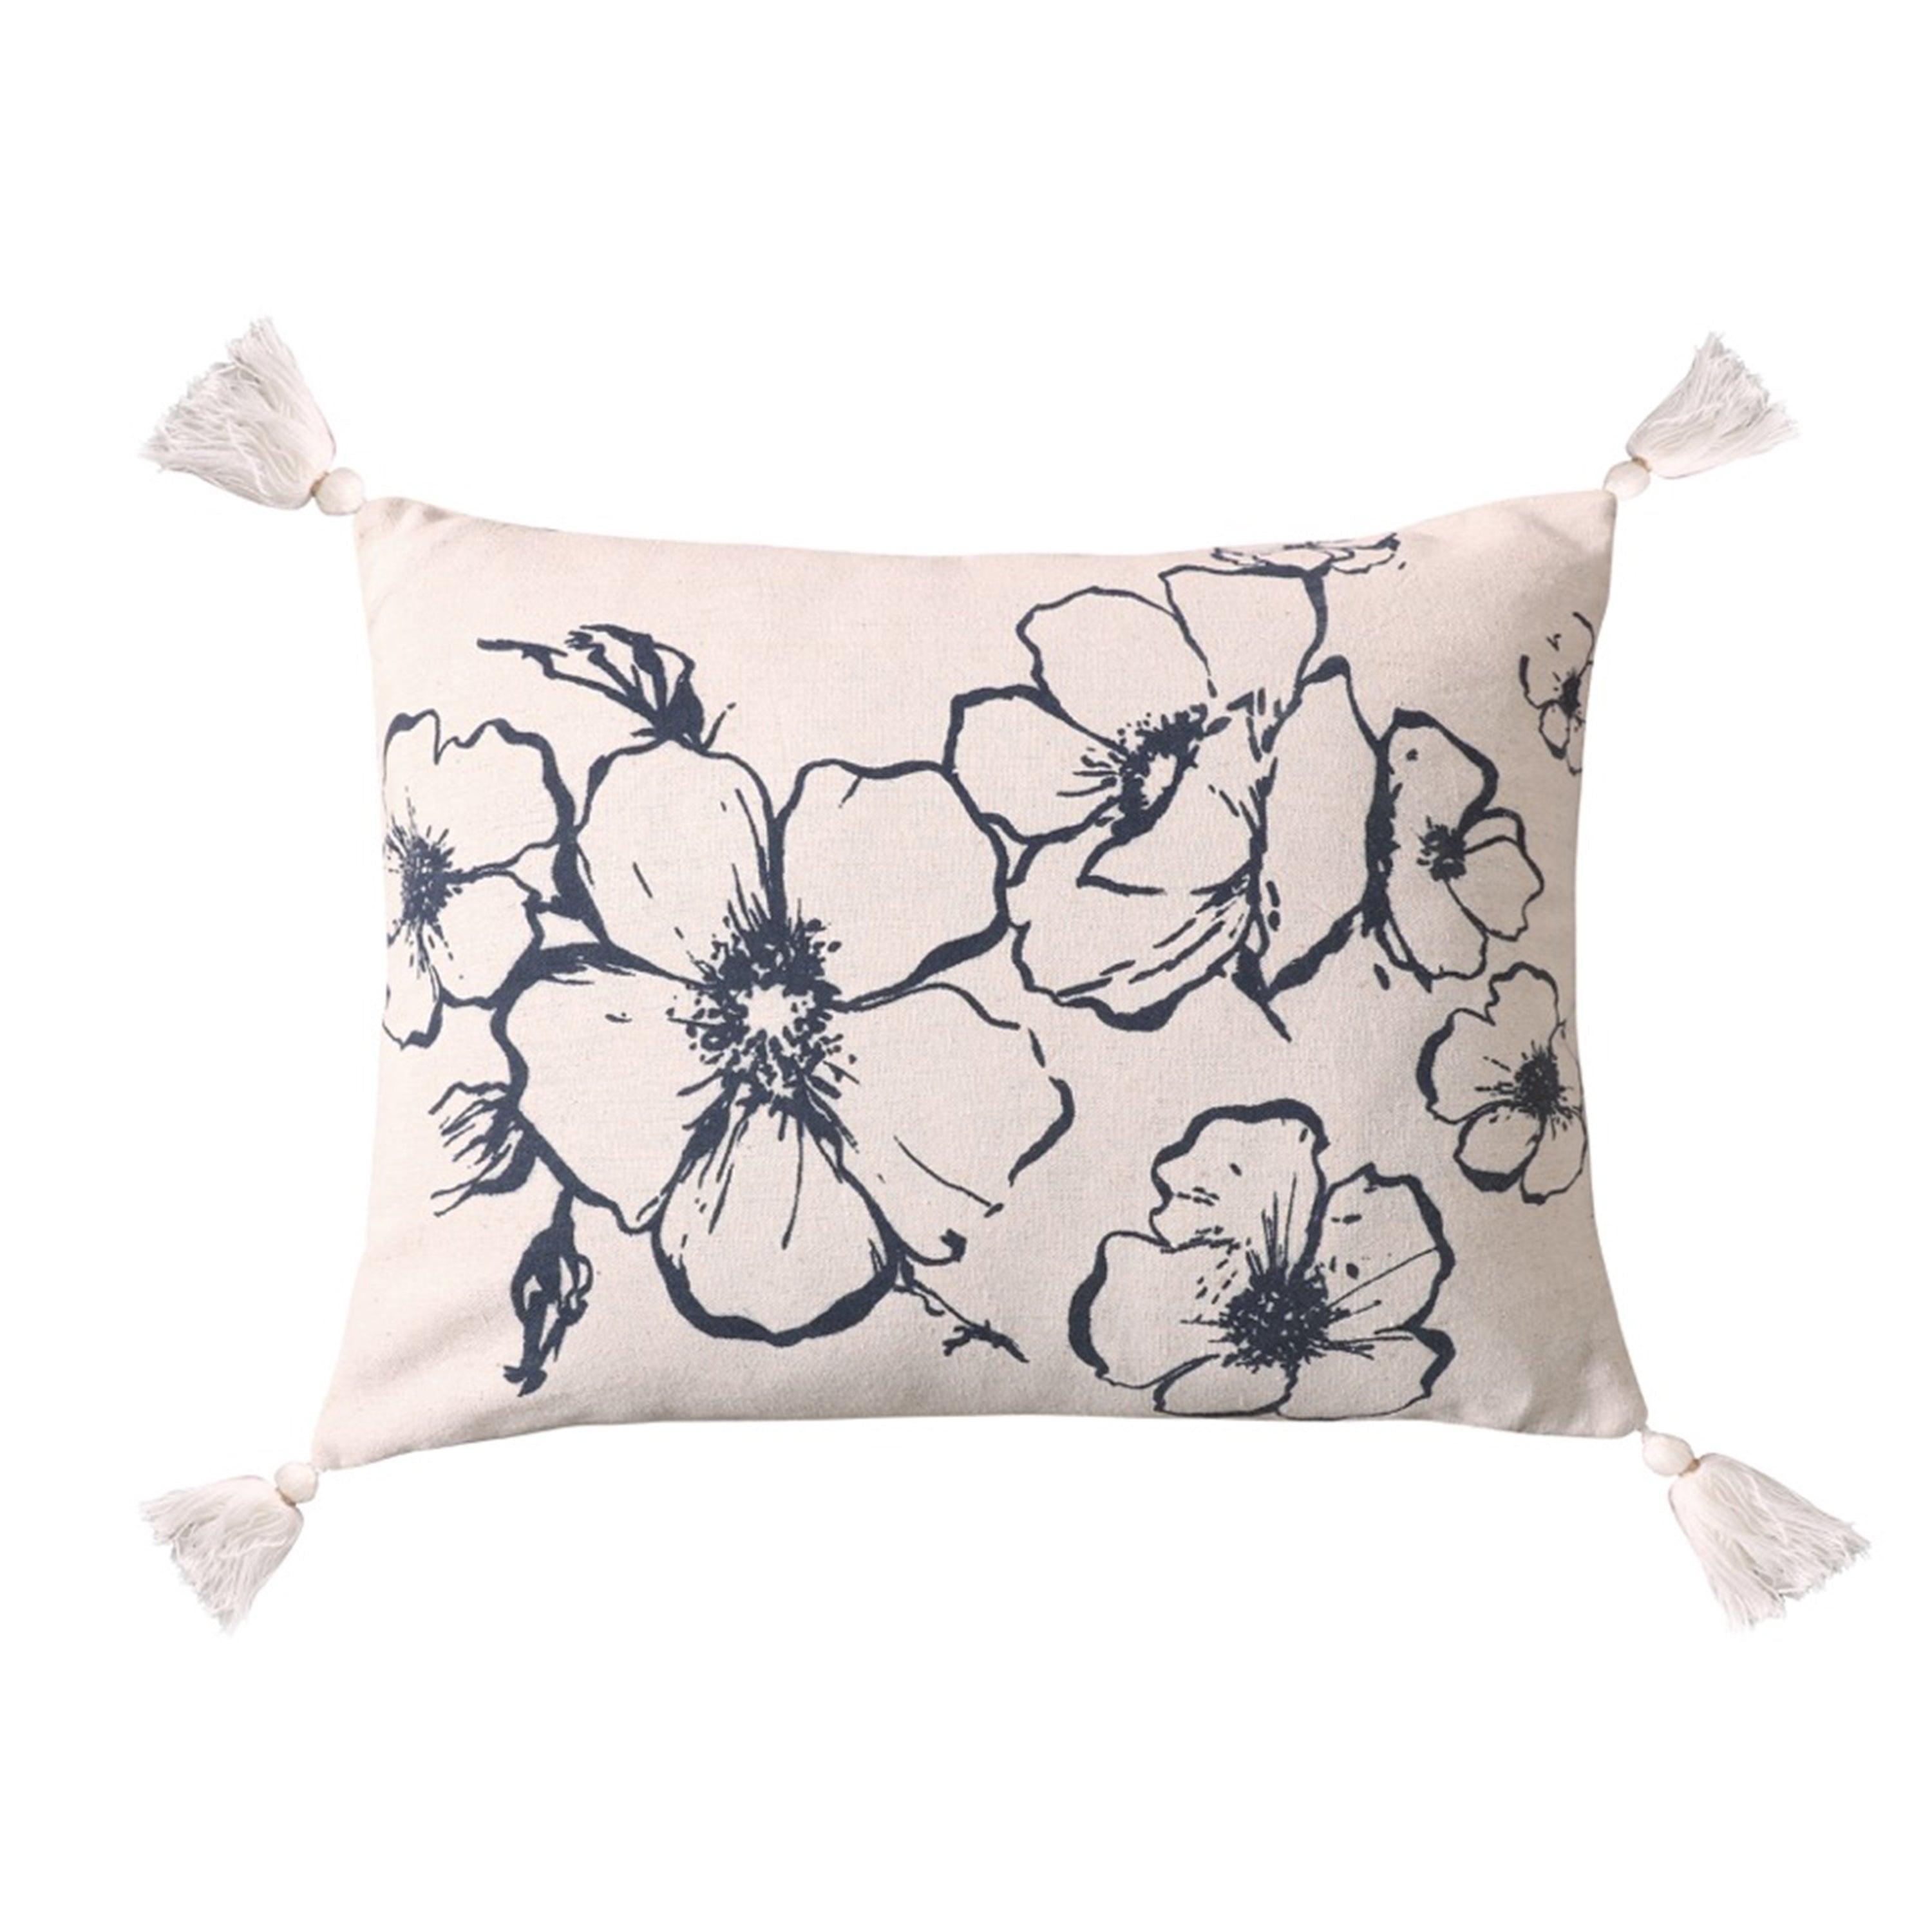 Blooming Printed Floral Pillow